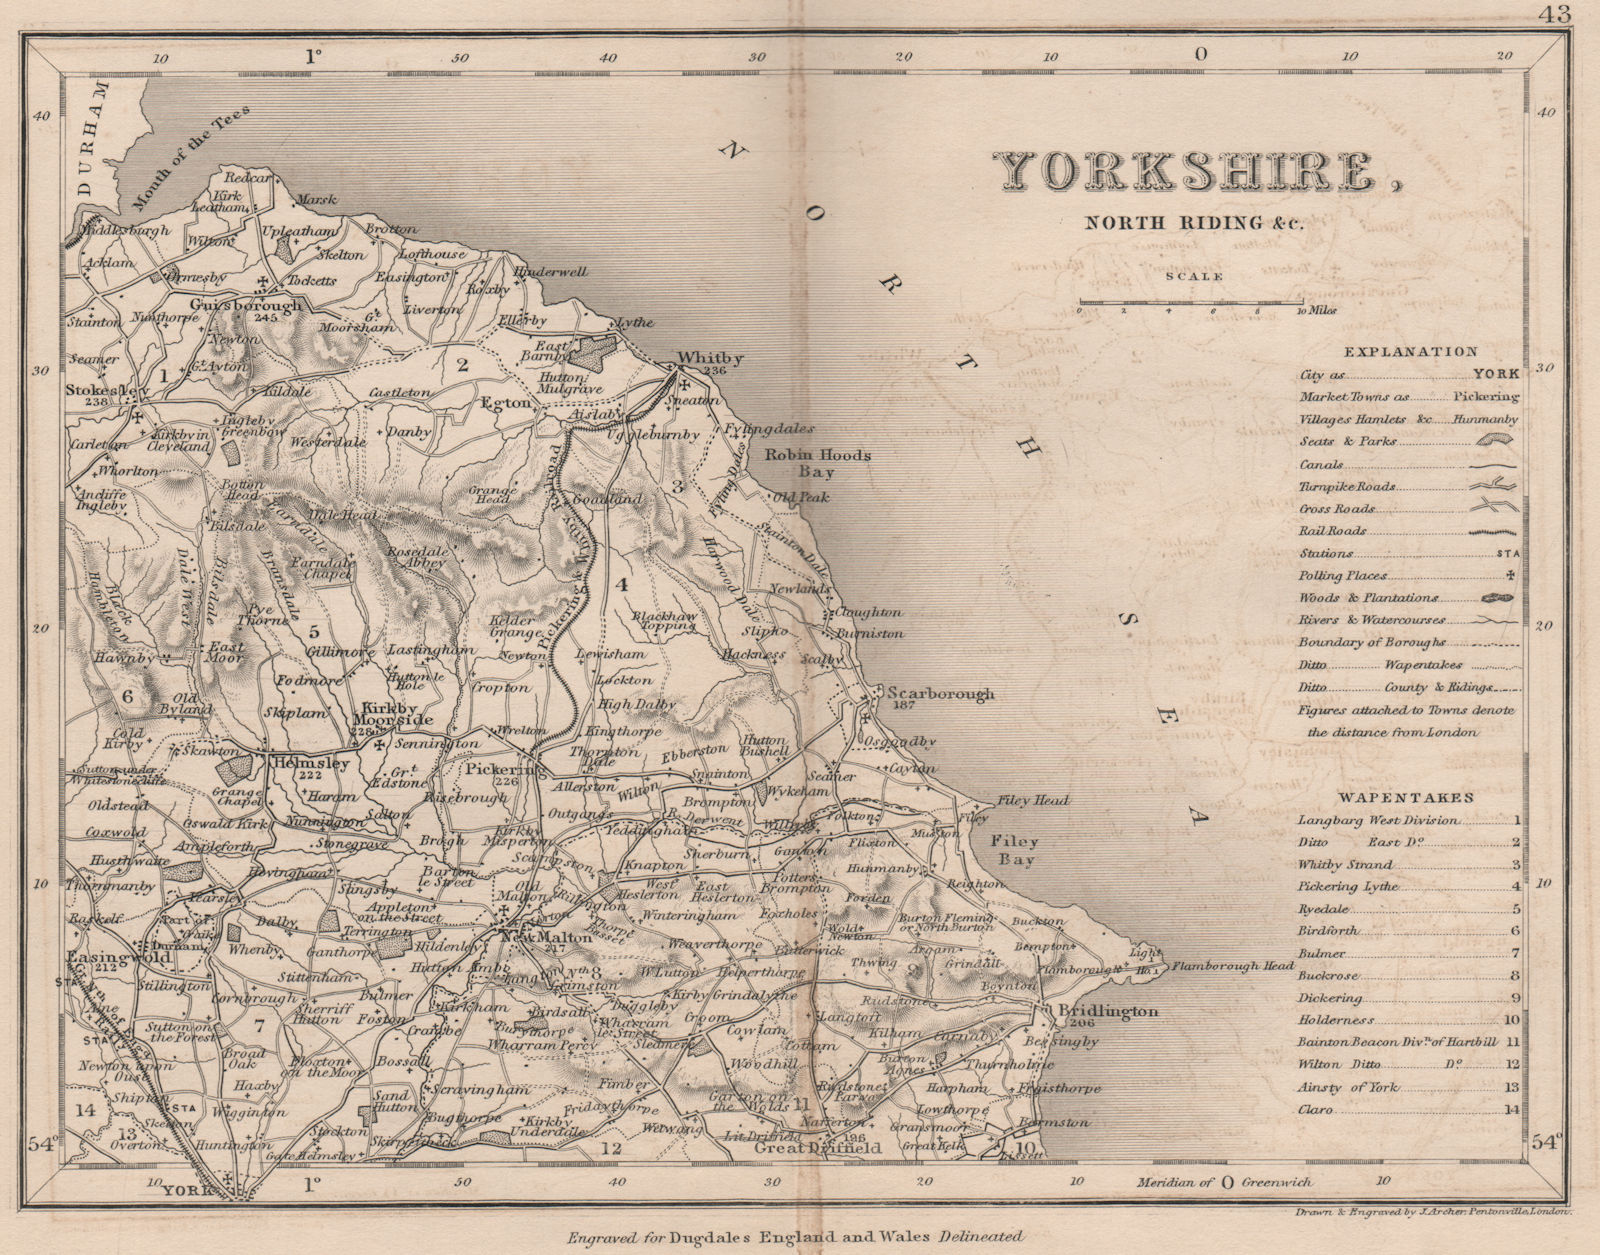 YORKSHIRE, NORTH EAST county map showing wapentakes by DUGDALE/ARCHER 1845